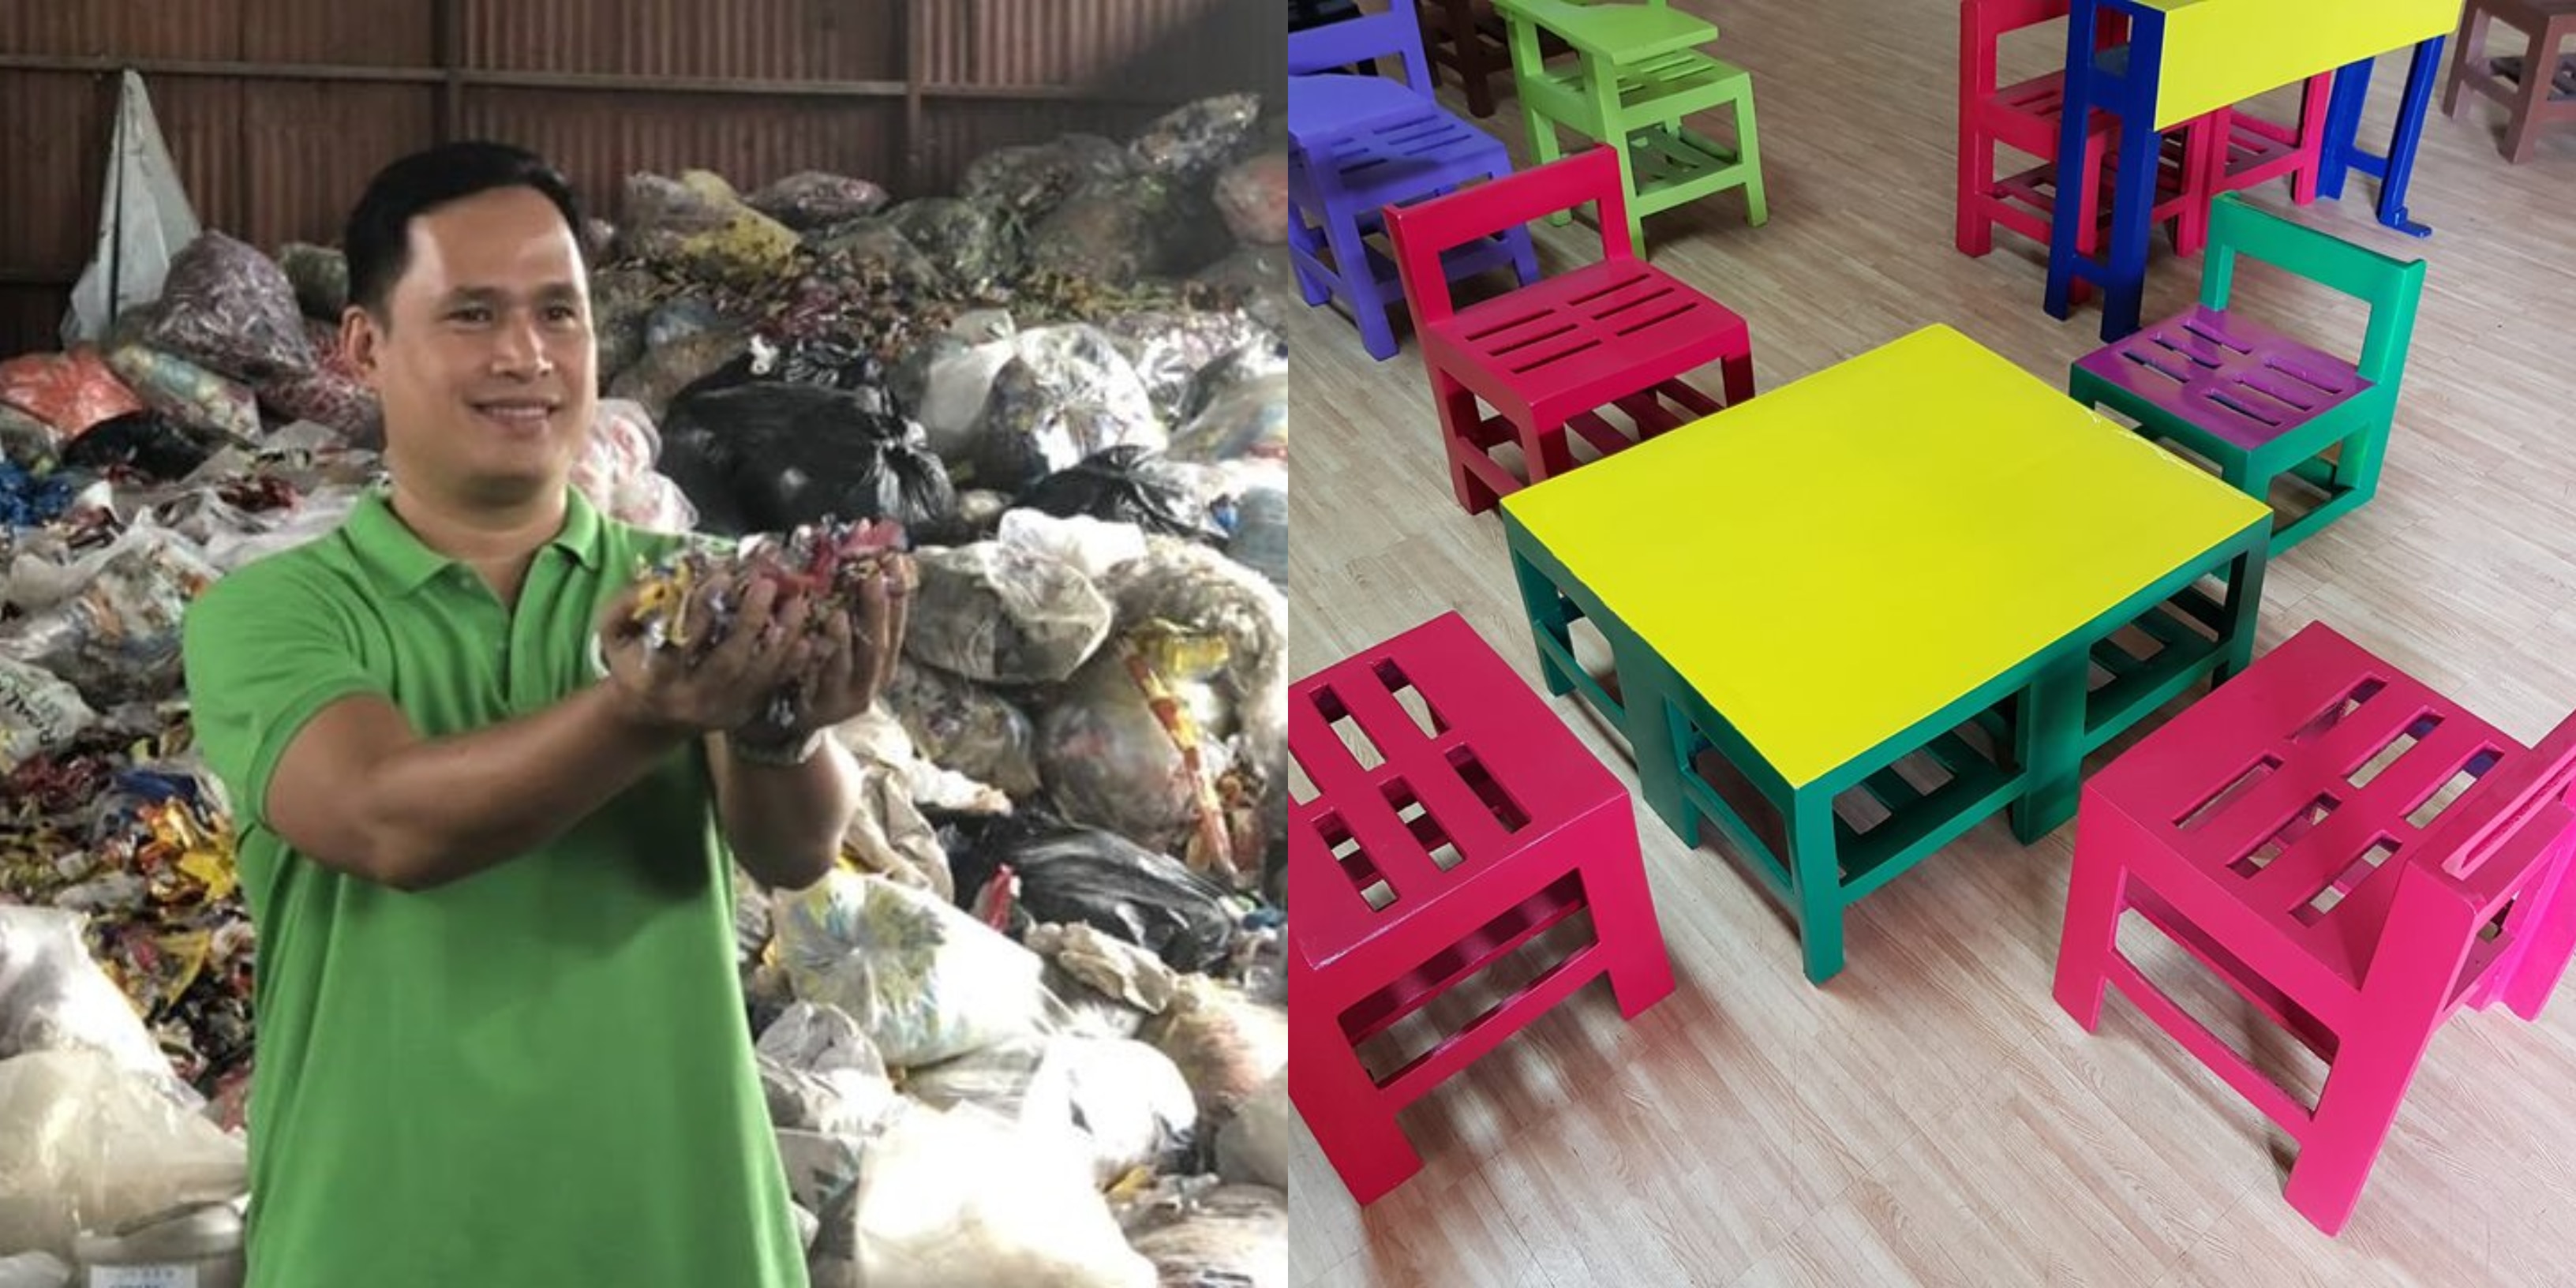 Winchester Lemen's recycled school chairs